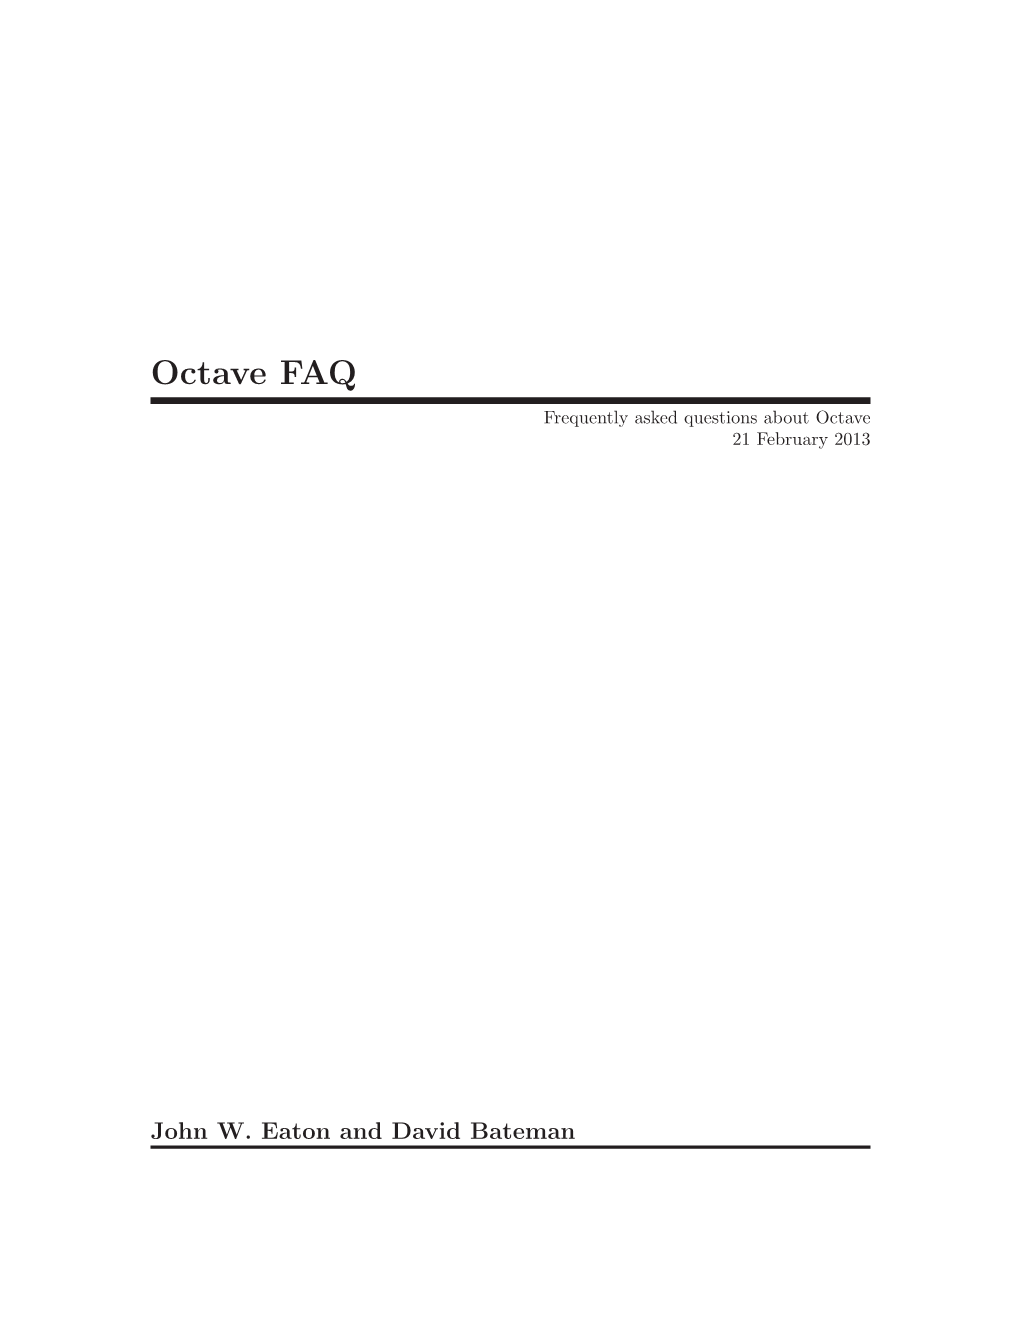 Octave FAQ Frequently Asked Questions About Octave 21 February 2013